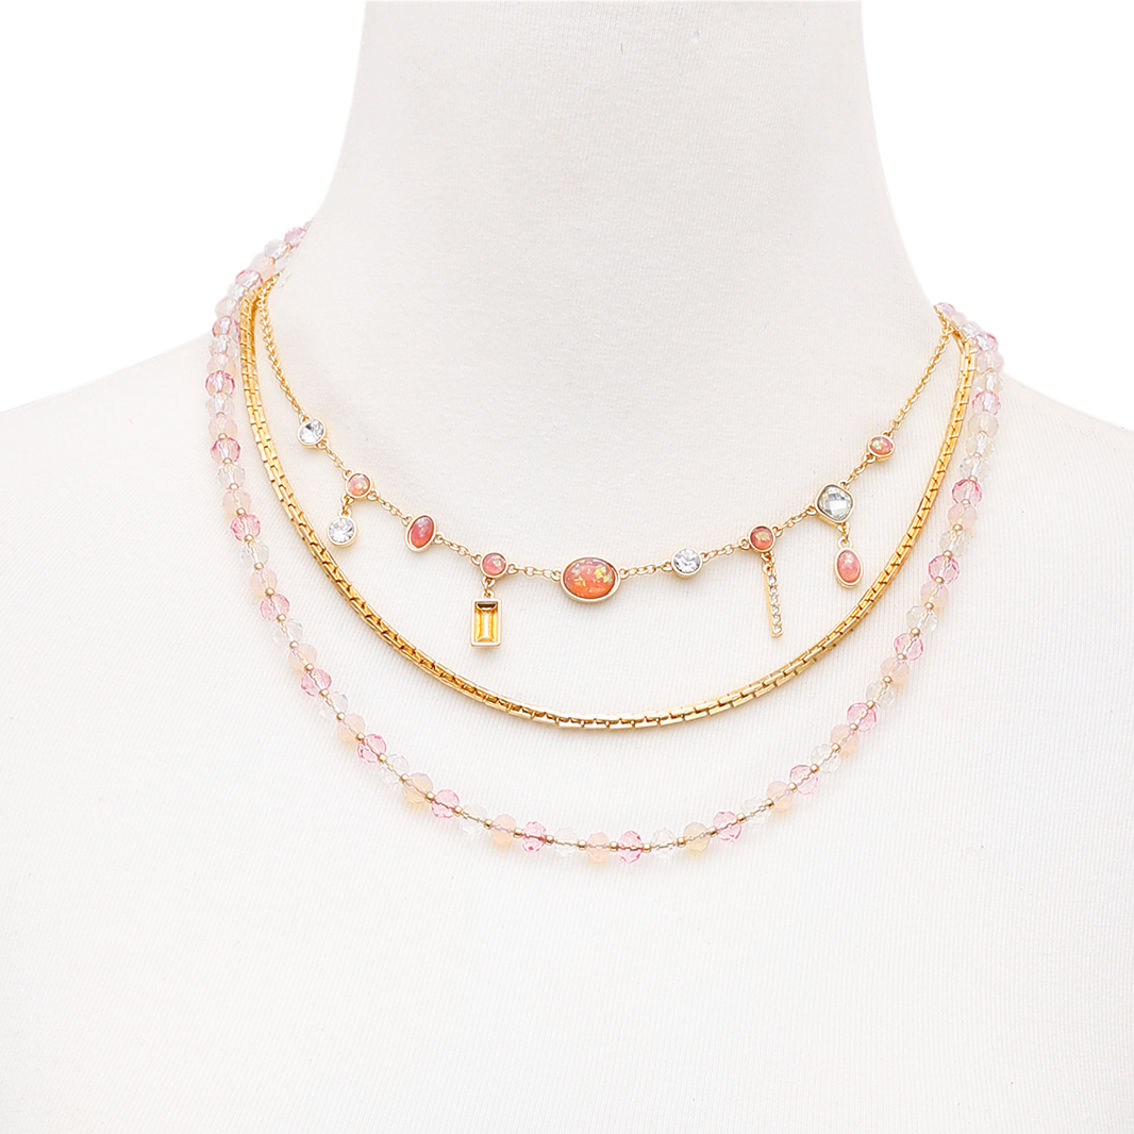 Guess Mystic Retreat Multi Layer Necklace with Stones - Image 2 of 2